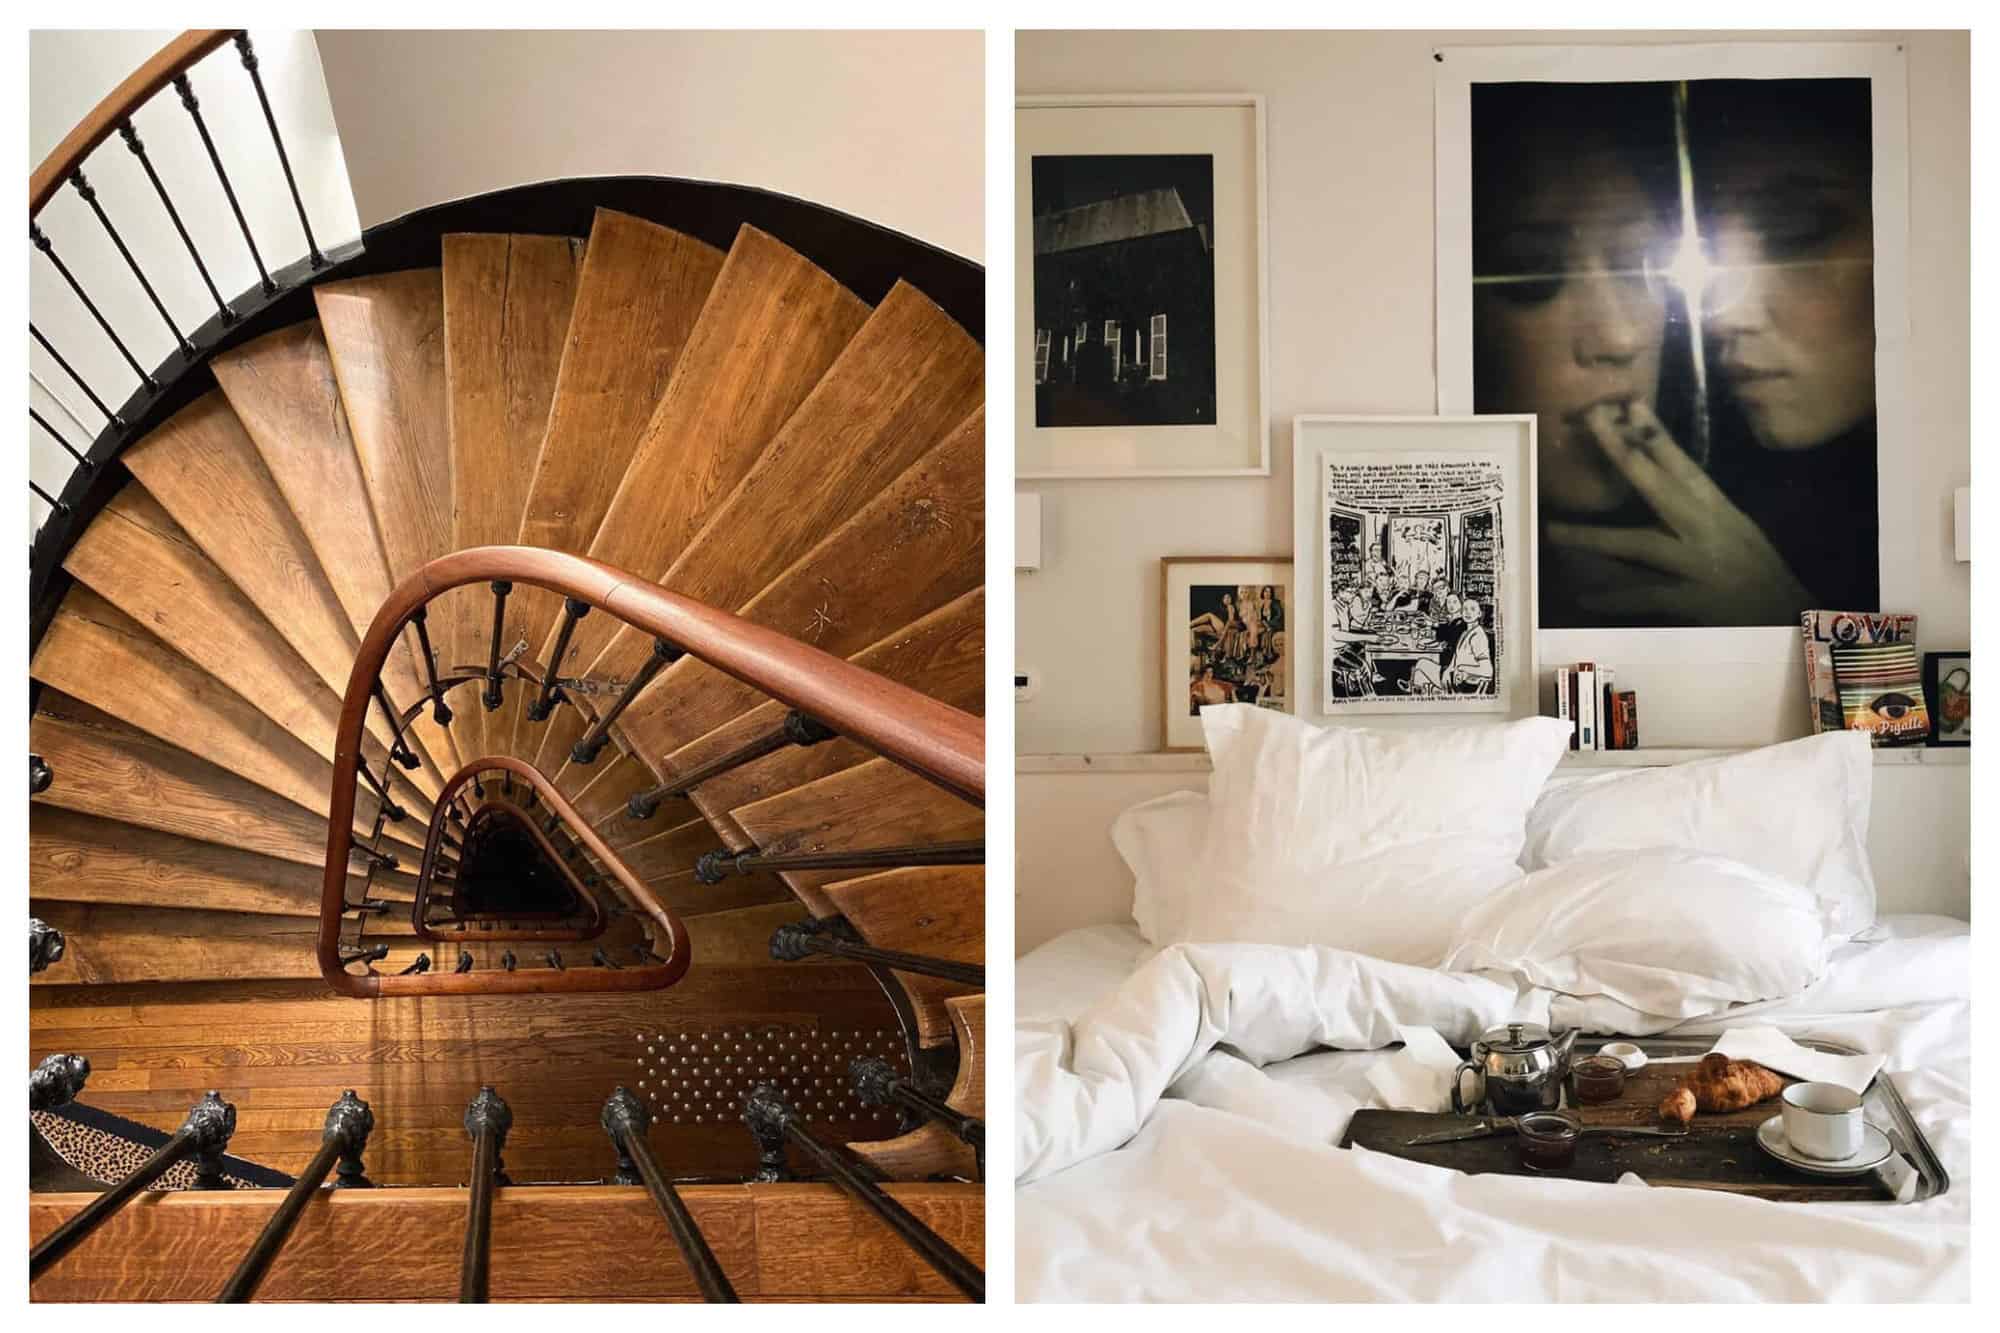 Left- A beautiful wooden spiral staircase at Le Pigalle.
Right- A bed with a breakfast tray in front of a wall with wall art.